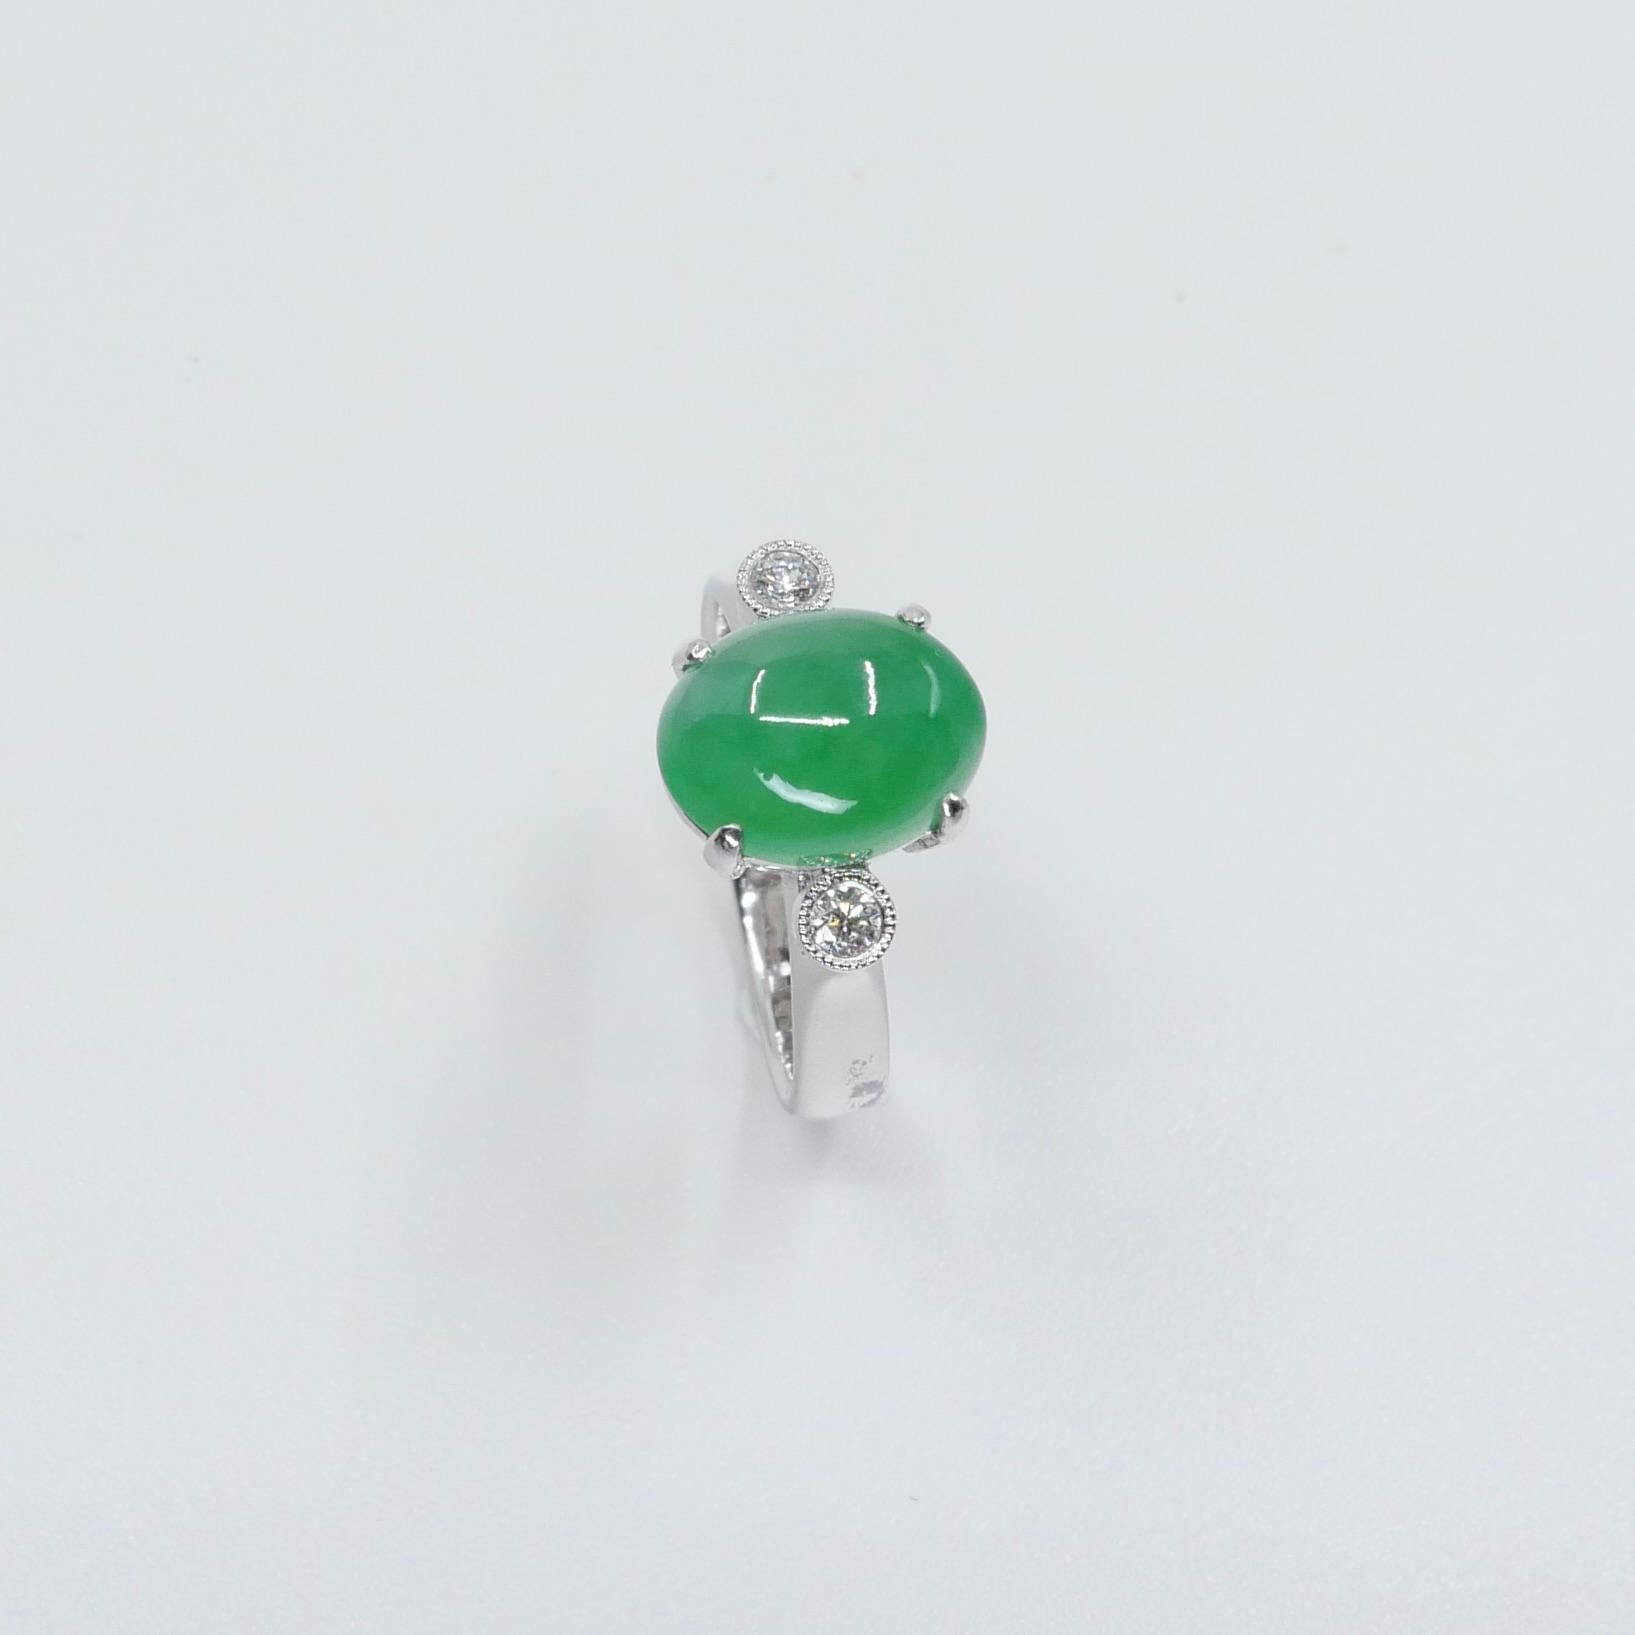 Certified Type a Jade & Oval Diamond 3 Stone Ring, Glowing Apple Green Color For Sale 2